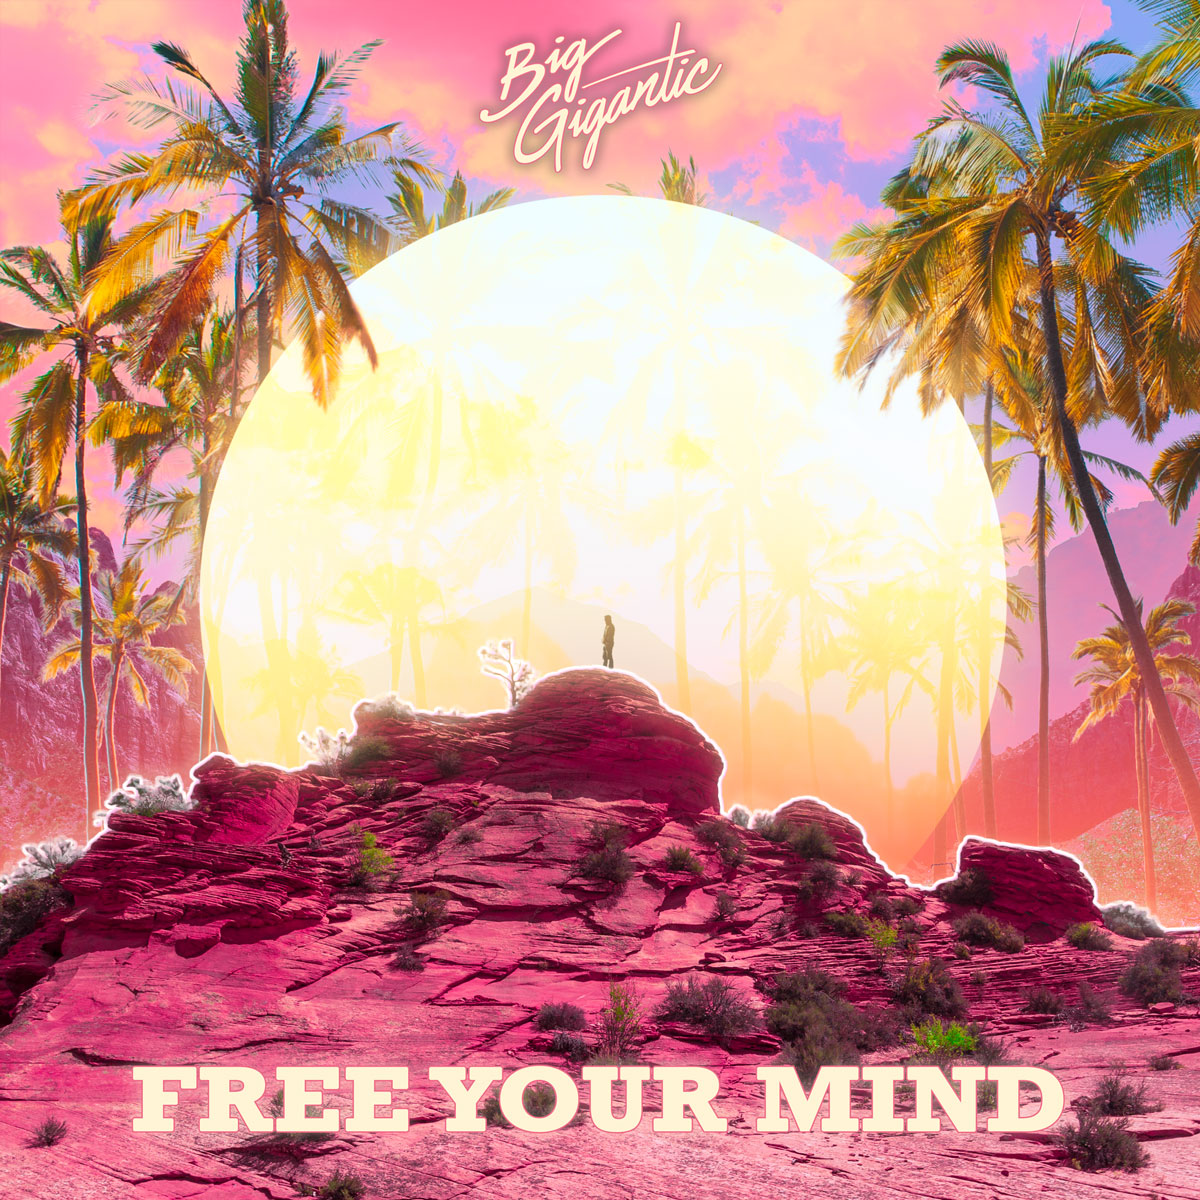 Free Your Mind album cover by Big Gigantic. Photo by: Big Gigantic